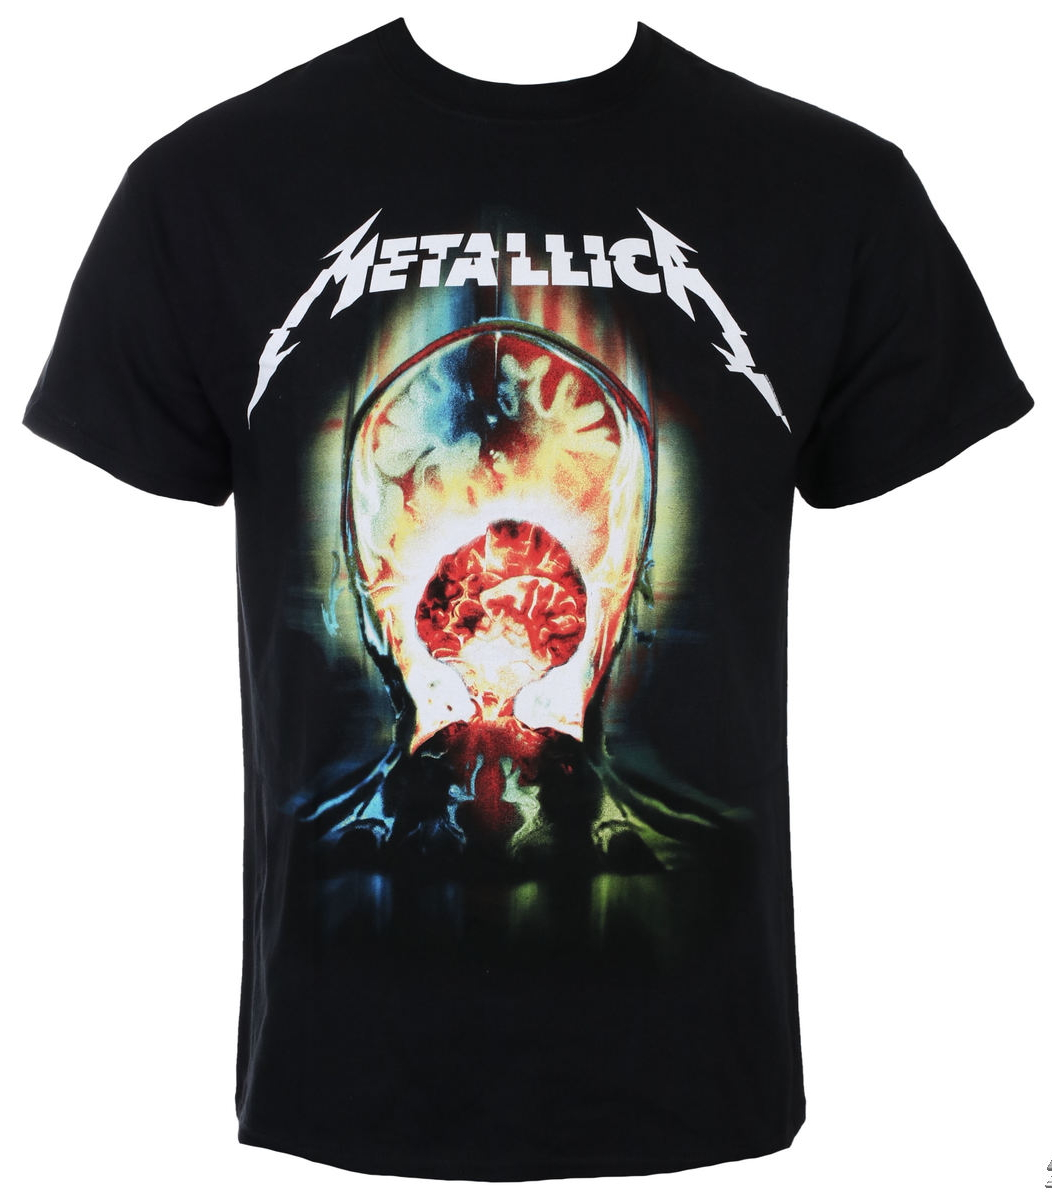 Metallica 'Hardwired Exploded' (Black) T-Shirt - NEW & OFFICIAL! | eBay